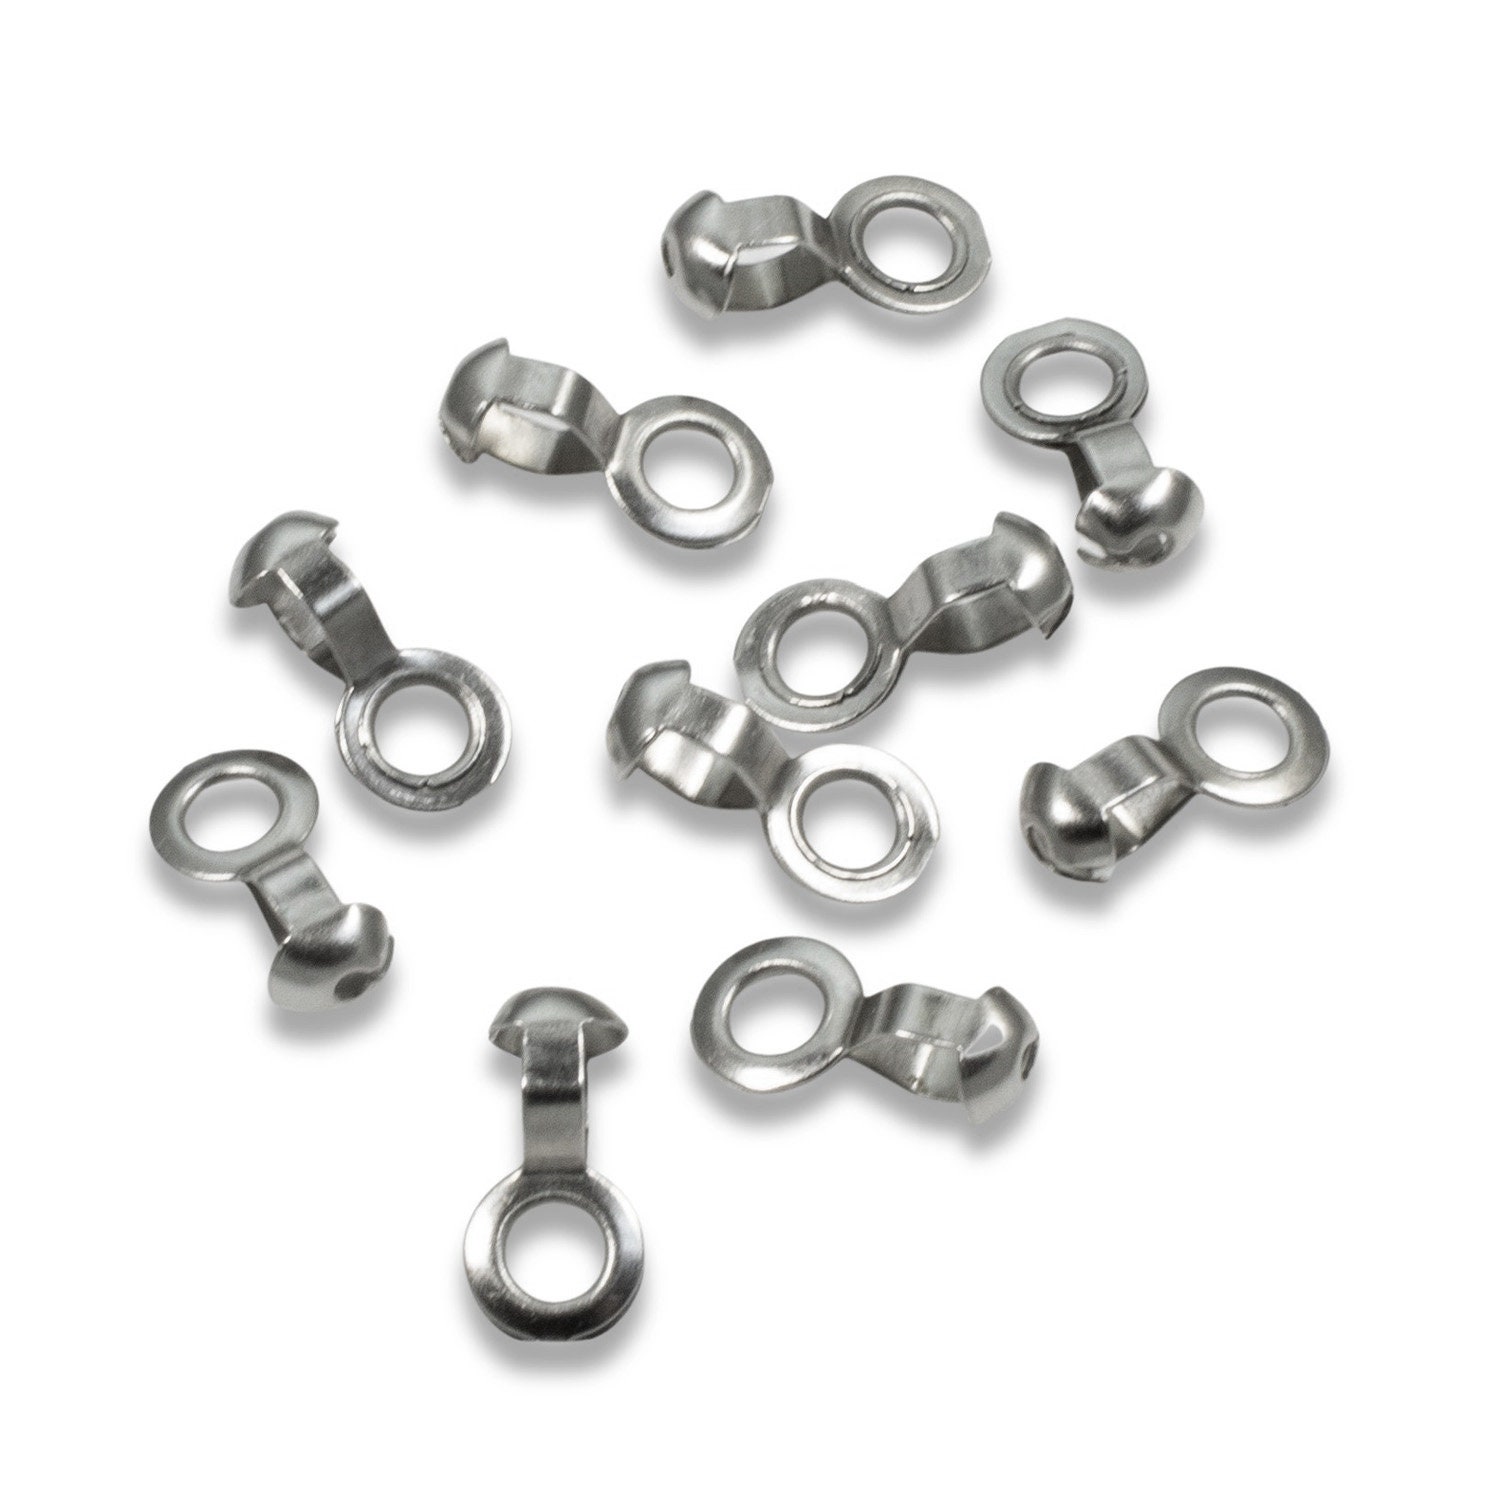 2mm Ball Chain, Ball Chain Connectors in Stainless Steel, Necklace, Anklet,  Bracelet Making, Jewelry Supplies 